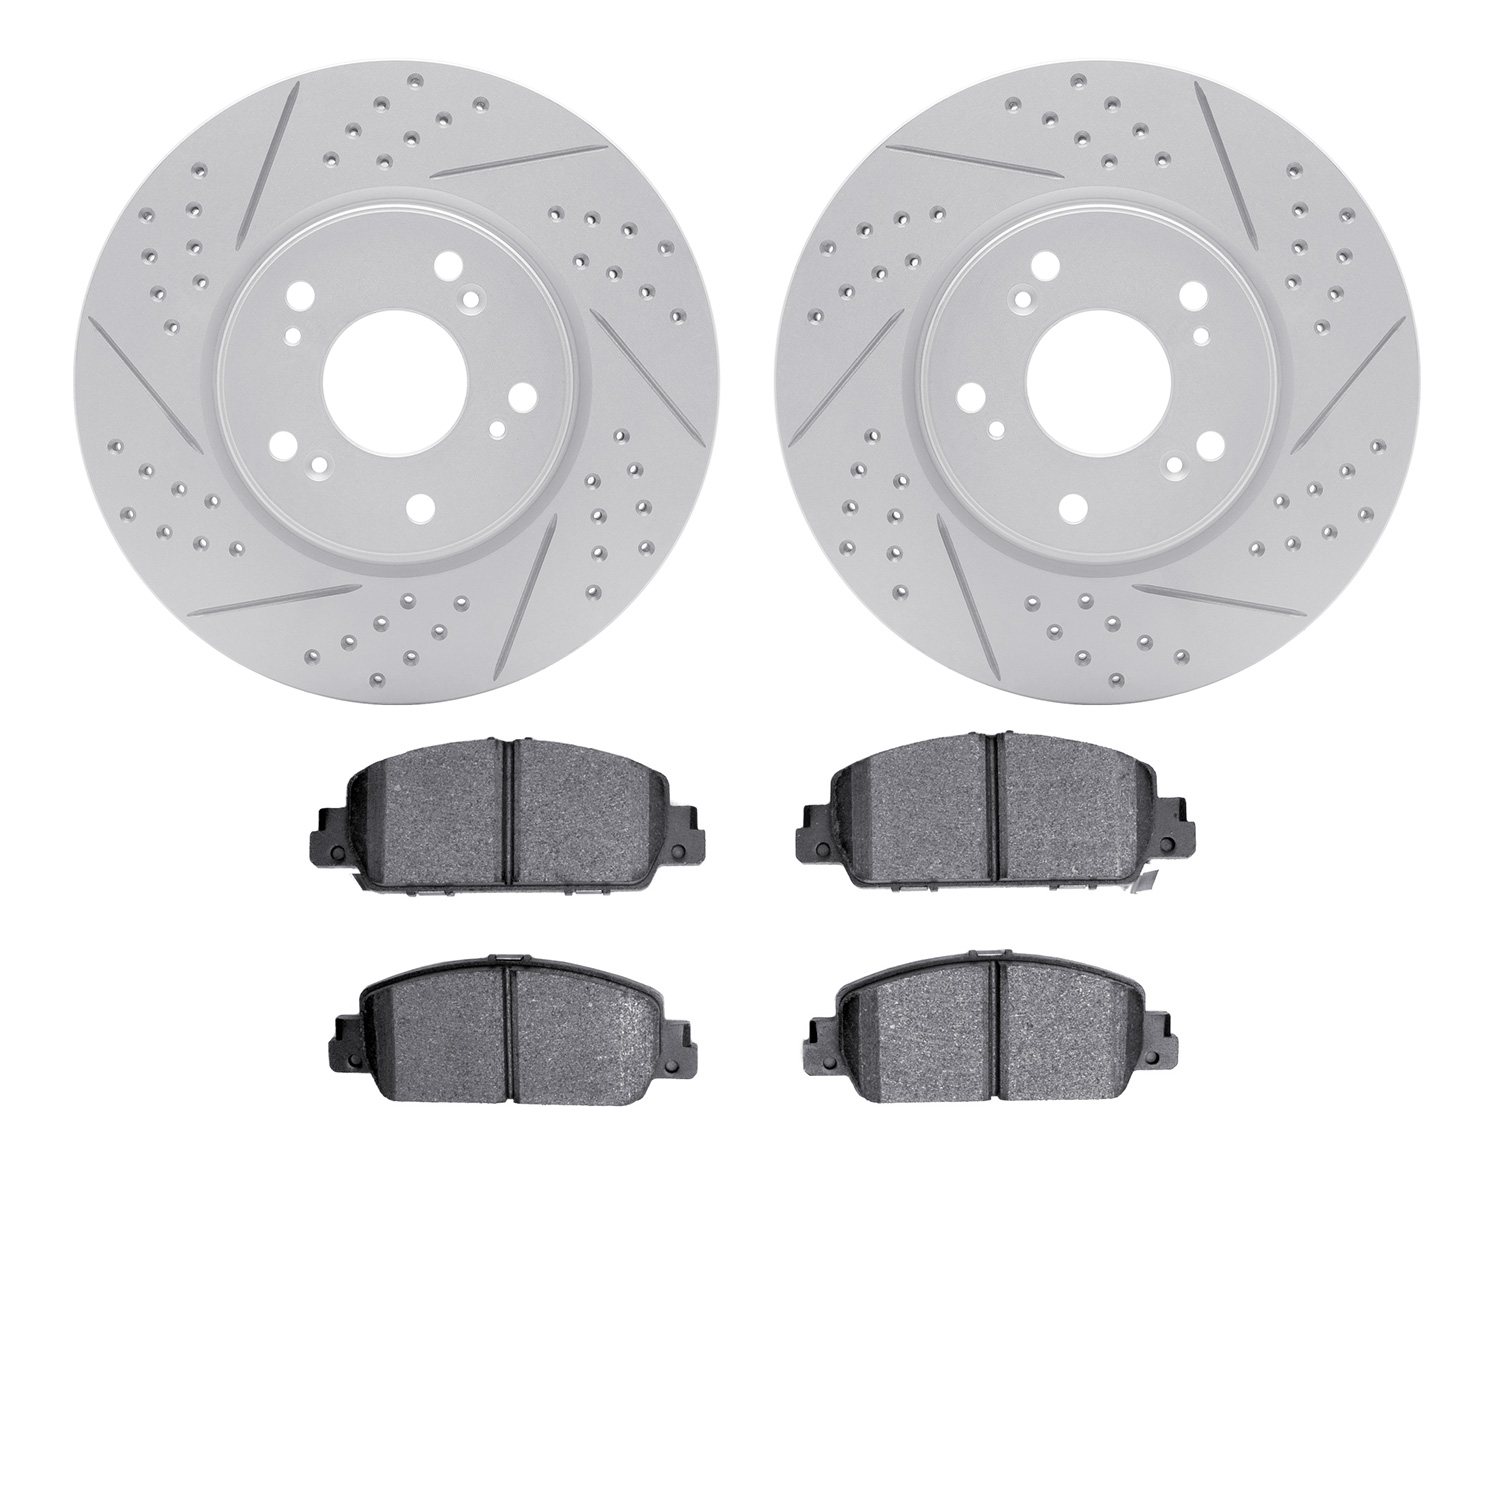 2502-59040 Geoperformance Drilled/Slotted Rotors w/5000 Advanced Brake Pads Kit, Fits Select Acura/Honda, Position: Front